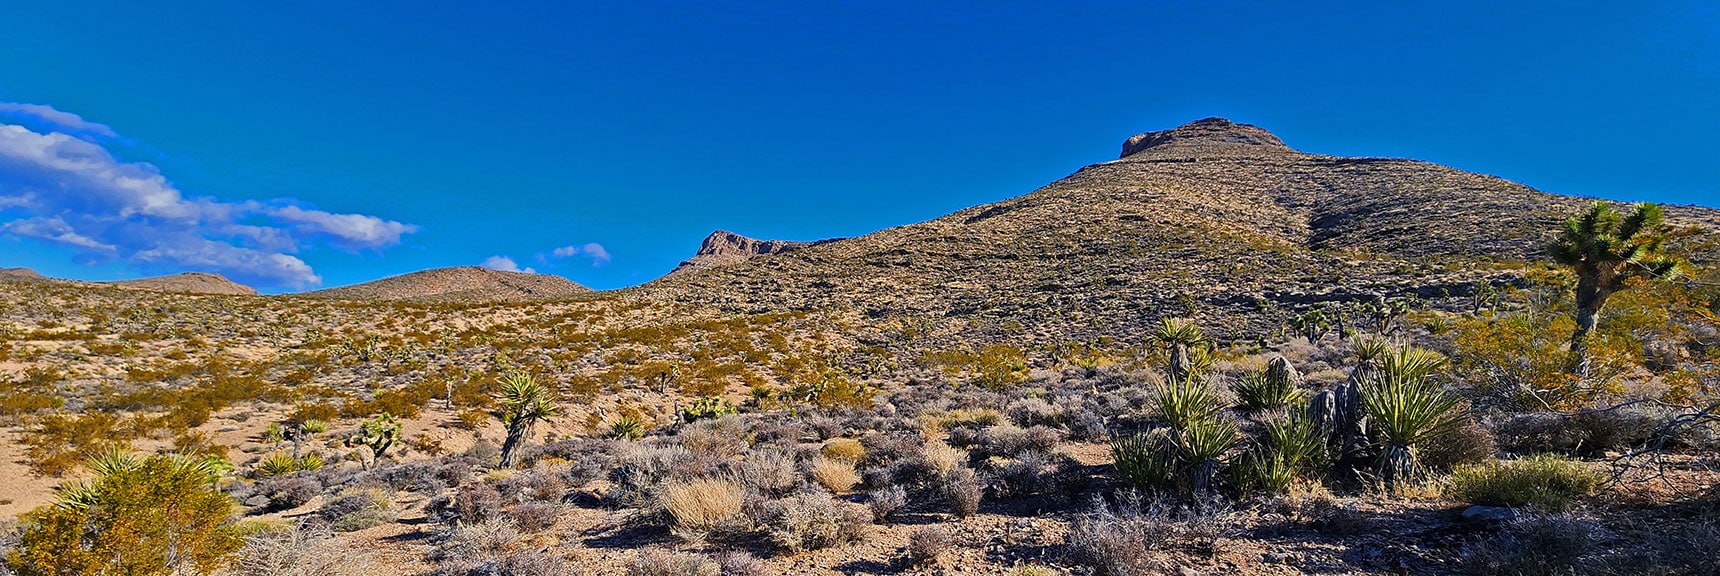 3rd Canyon: Long Ridge Canyon Stretches to Left of Large Hill | Landmark Bluff Summit | Lovell Canyon, Nevada